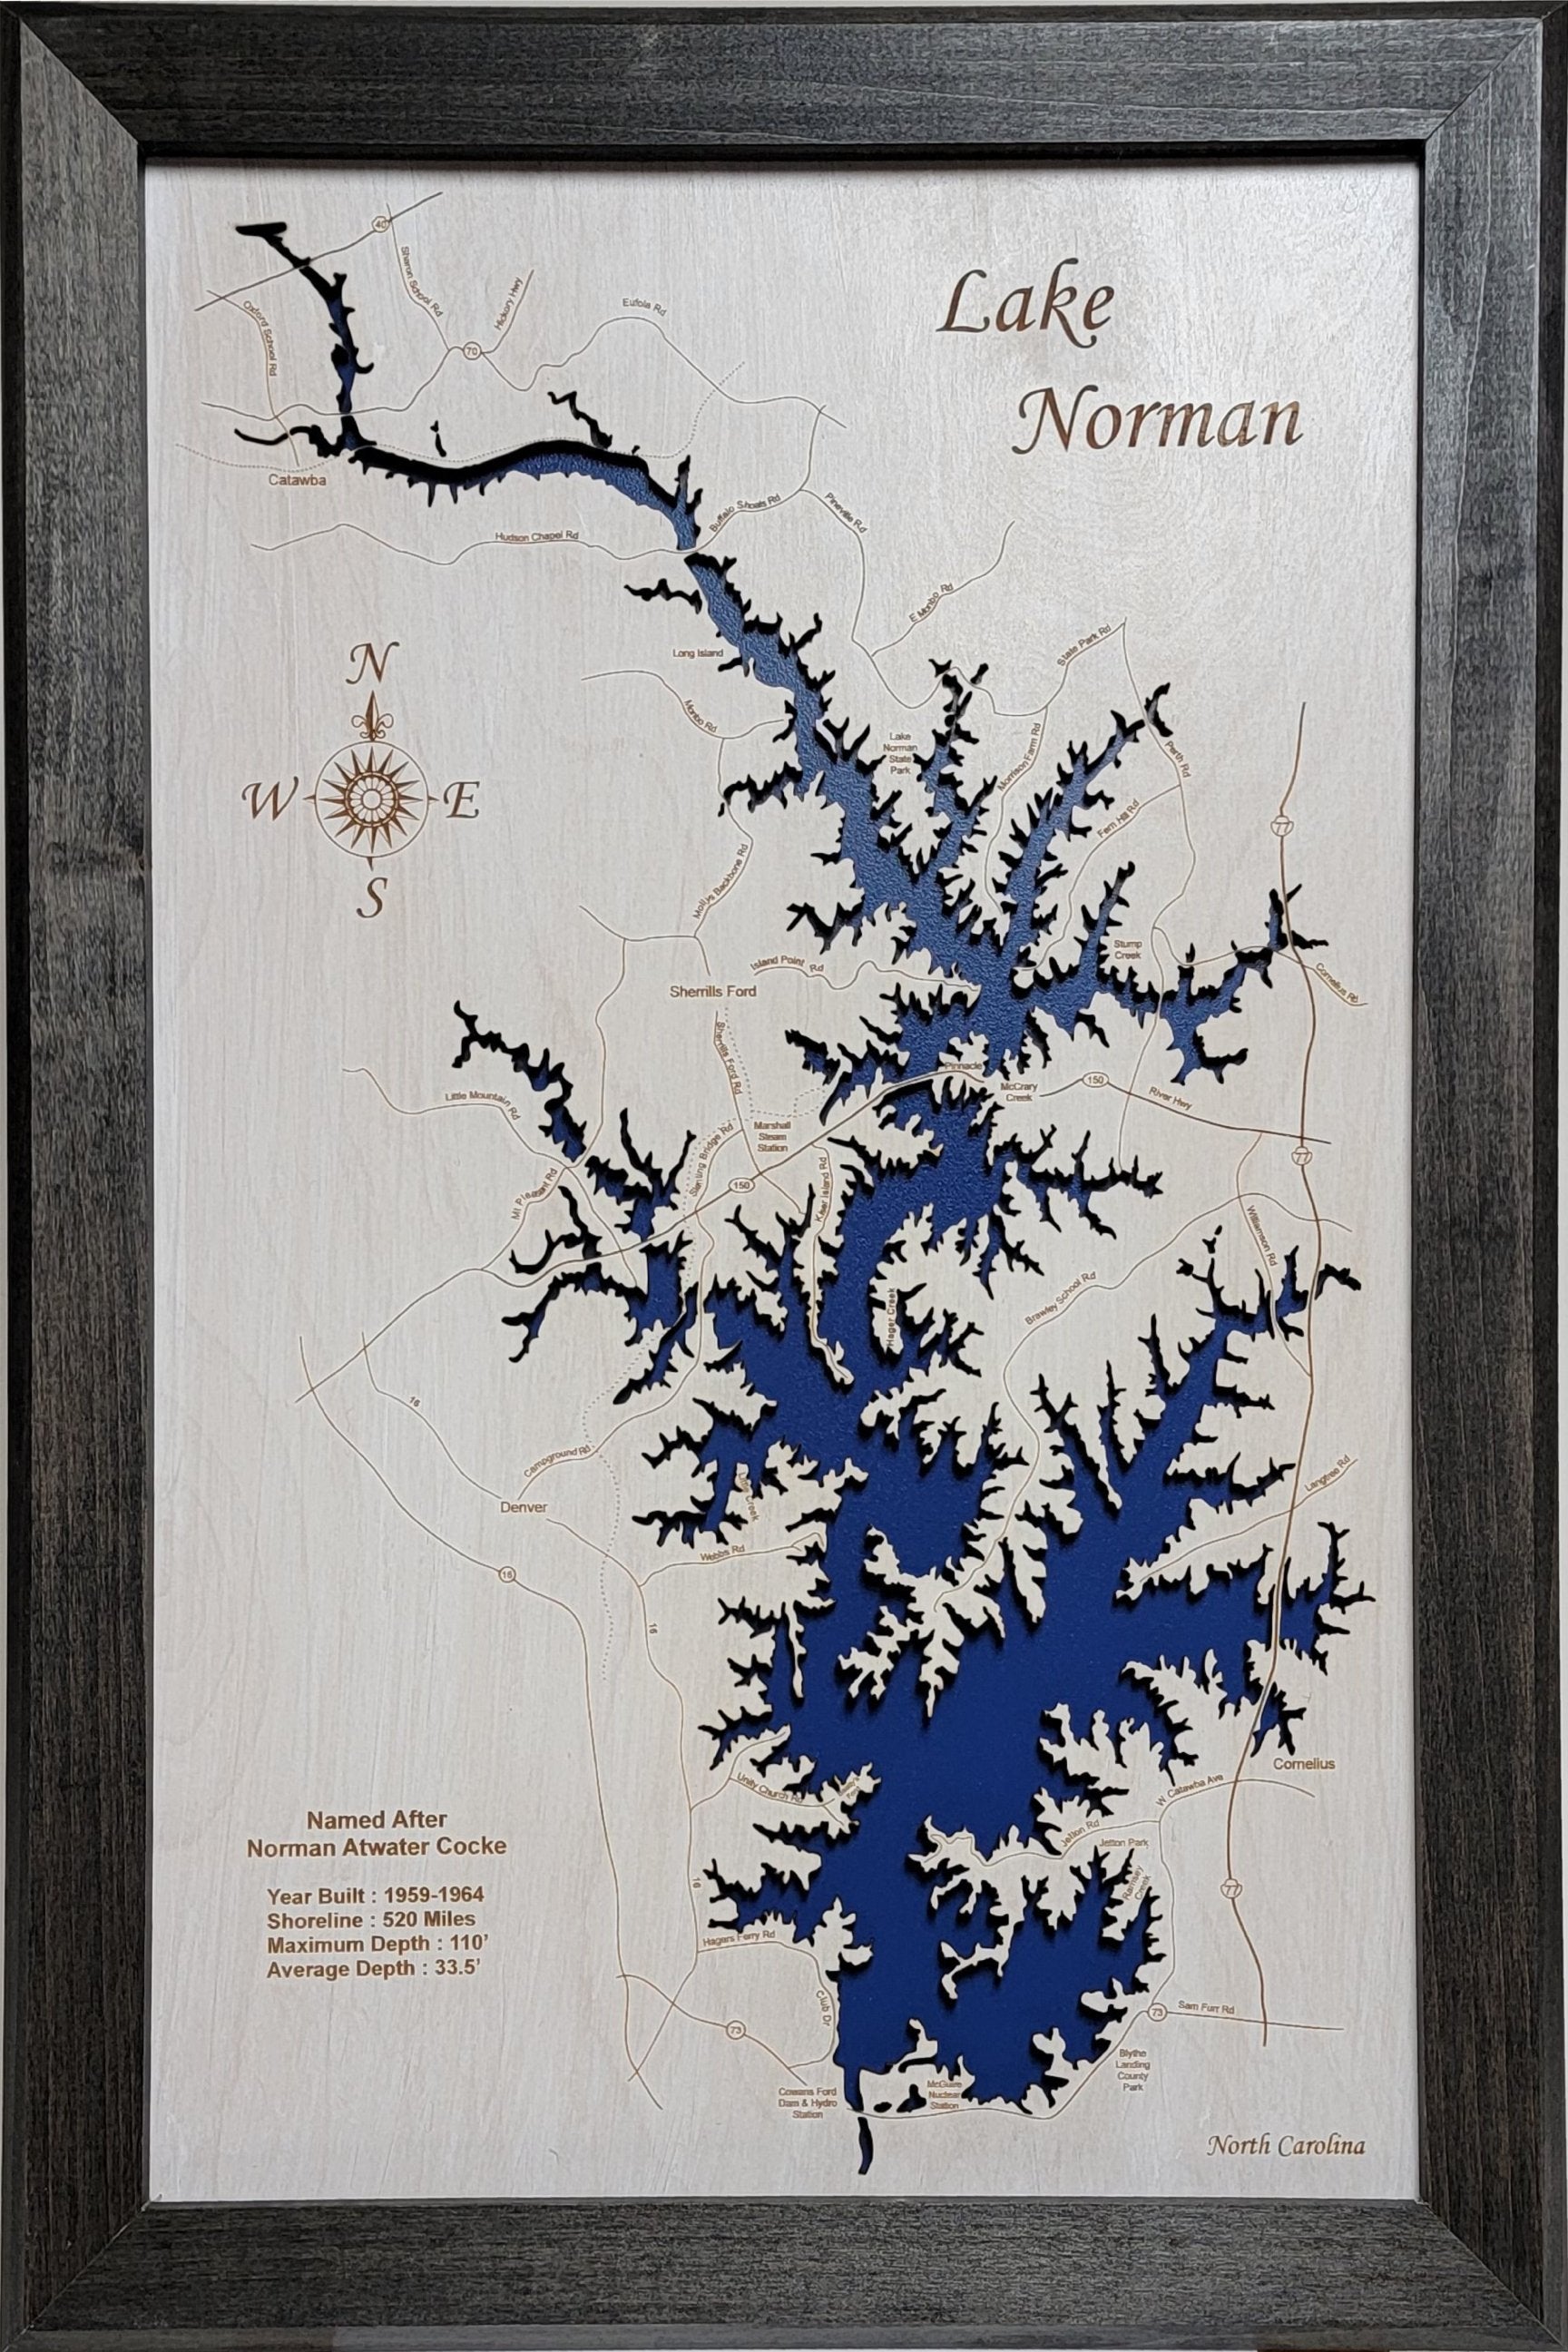 Custom Map Gift Engraved on Wood Map Personalized Gifts Wooden Map Wall Art Wood Wall Decor Laser Cut